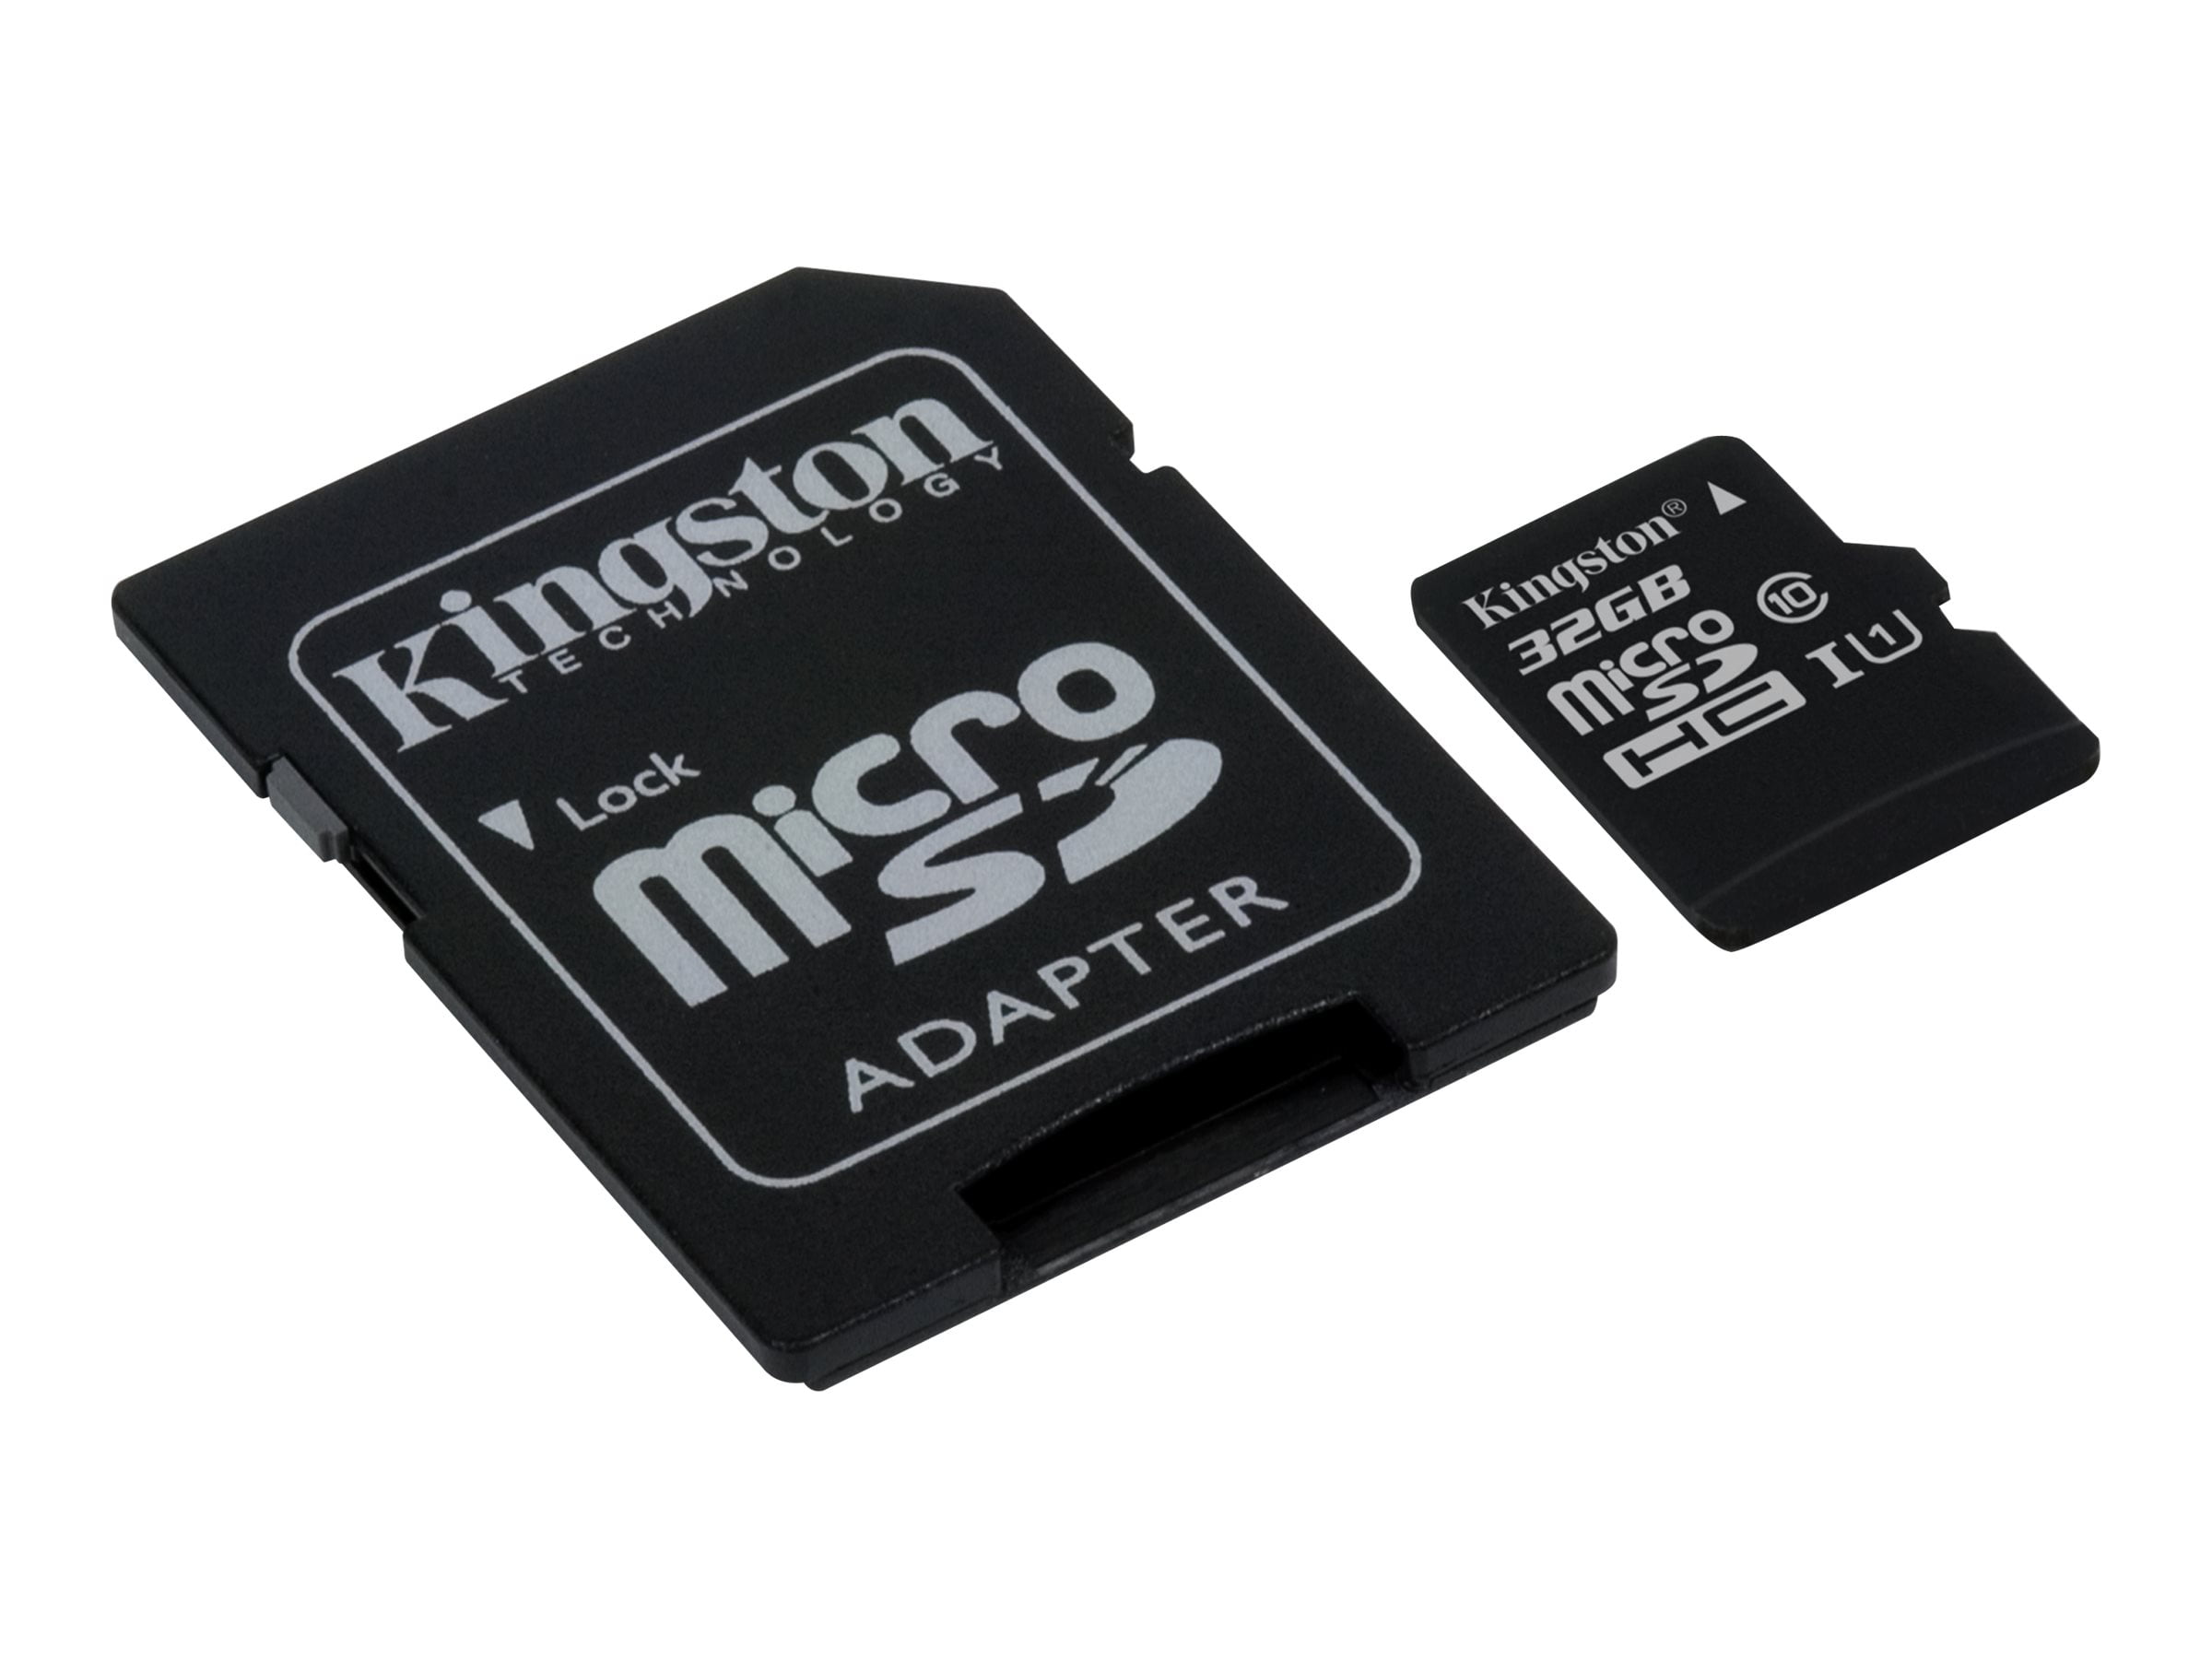 Kingston 128GB Samsung Galaxy 10 5G MicroSDXC Canvas Select Plus Card Verified by SanFlash. 100MBs Works with Kingston 